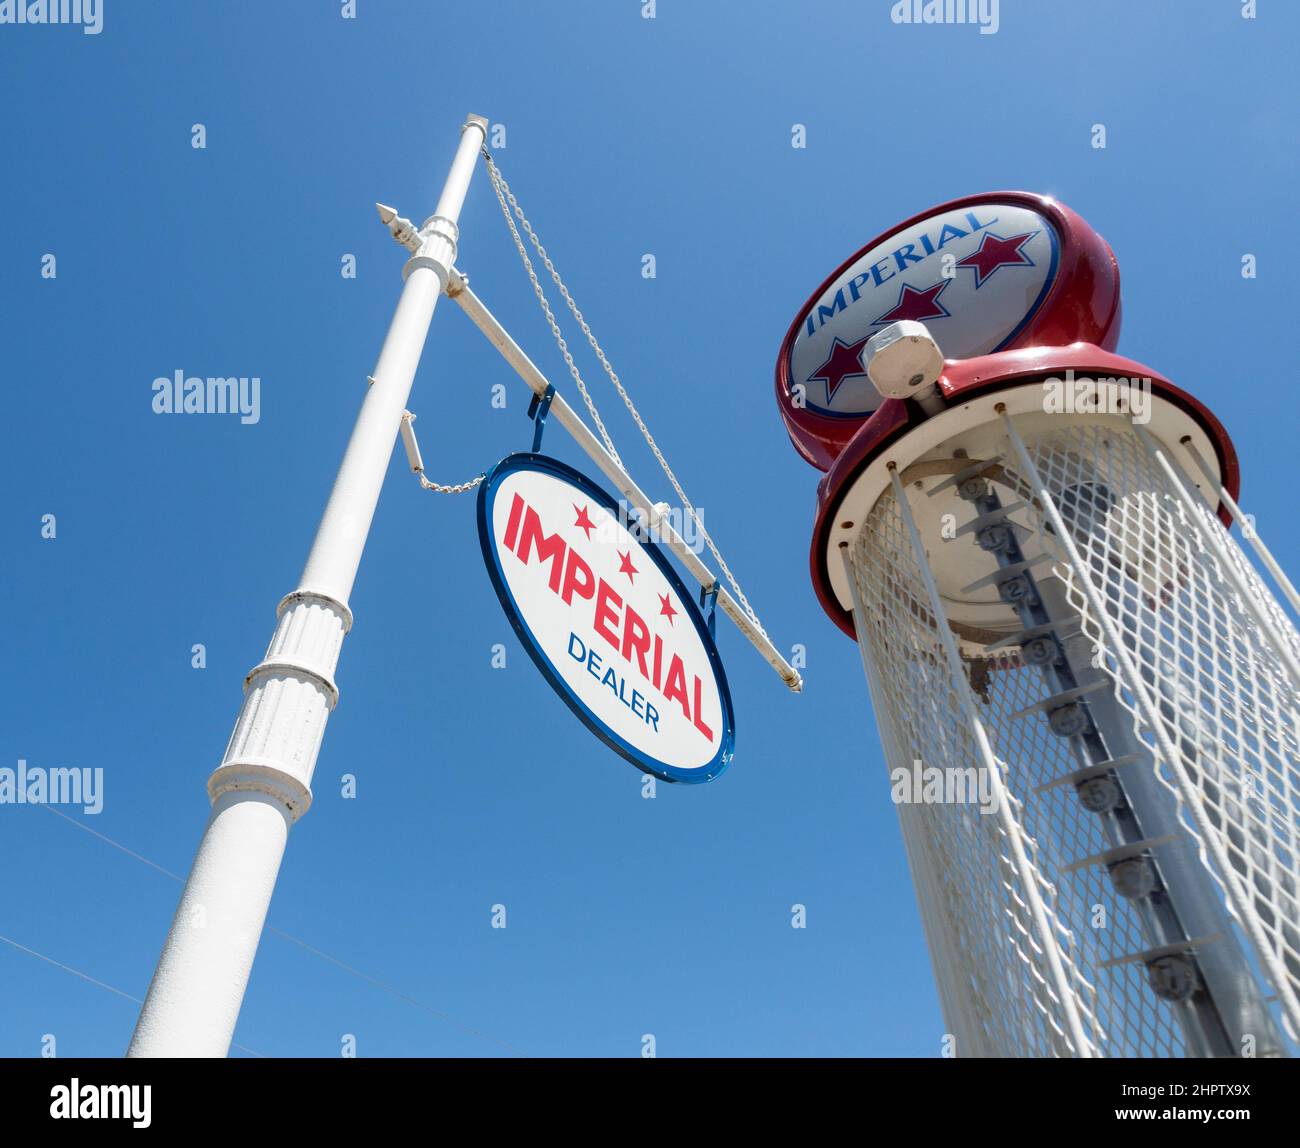 Vintage Imperial Gas Pump: An Imperial sign with an old gas pump behind against a bright blue sky. Stock Photo